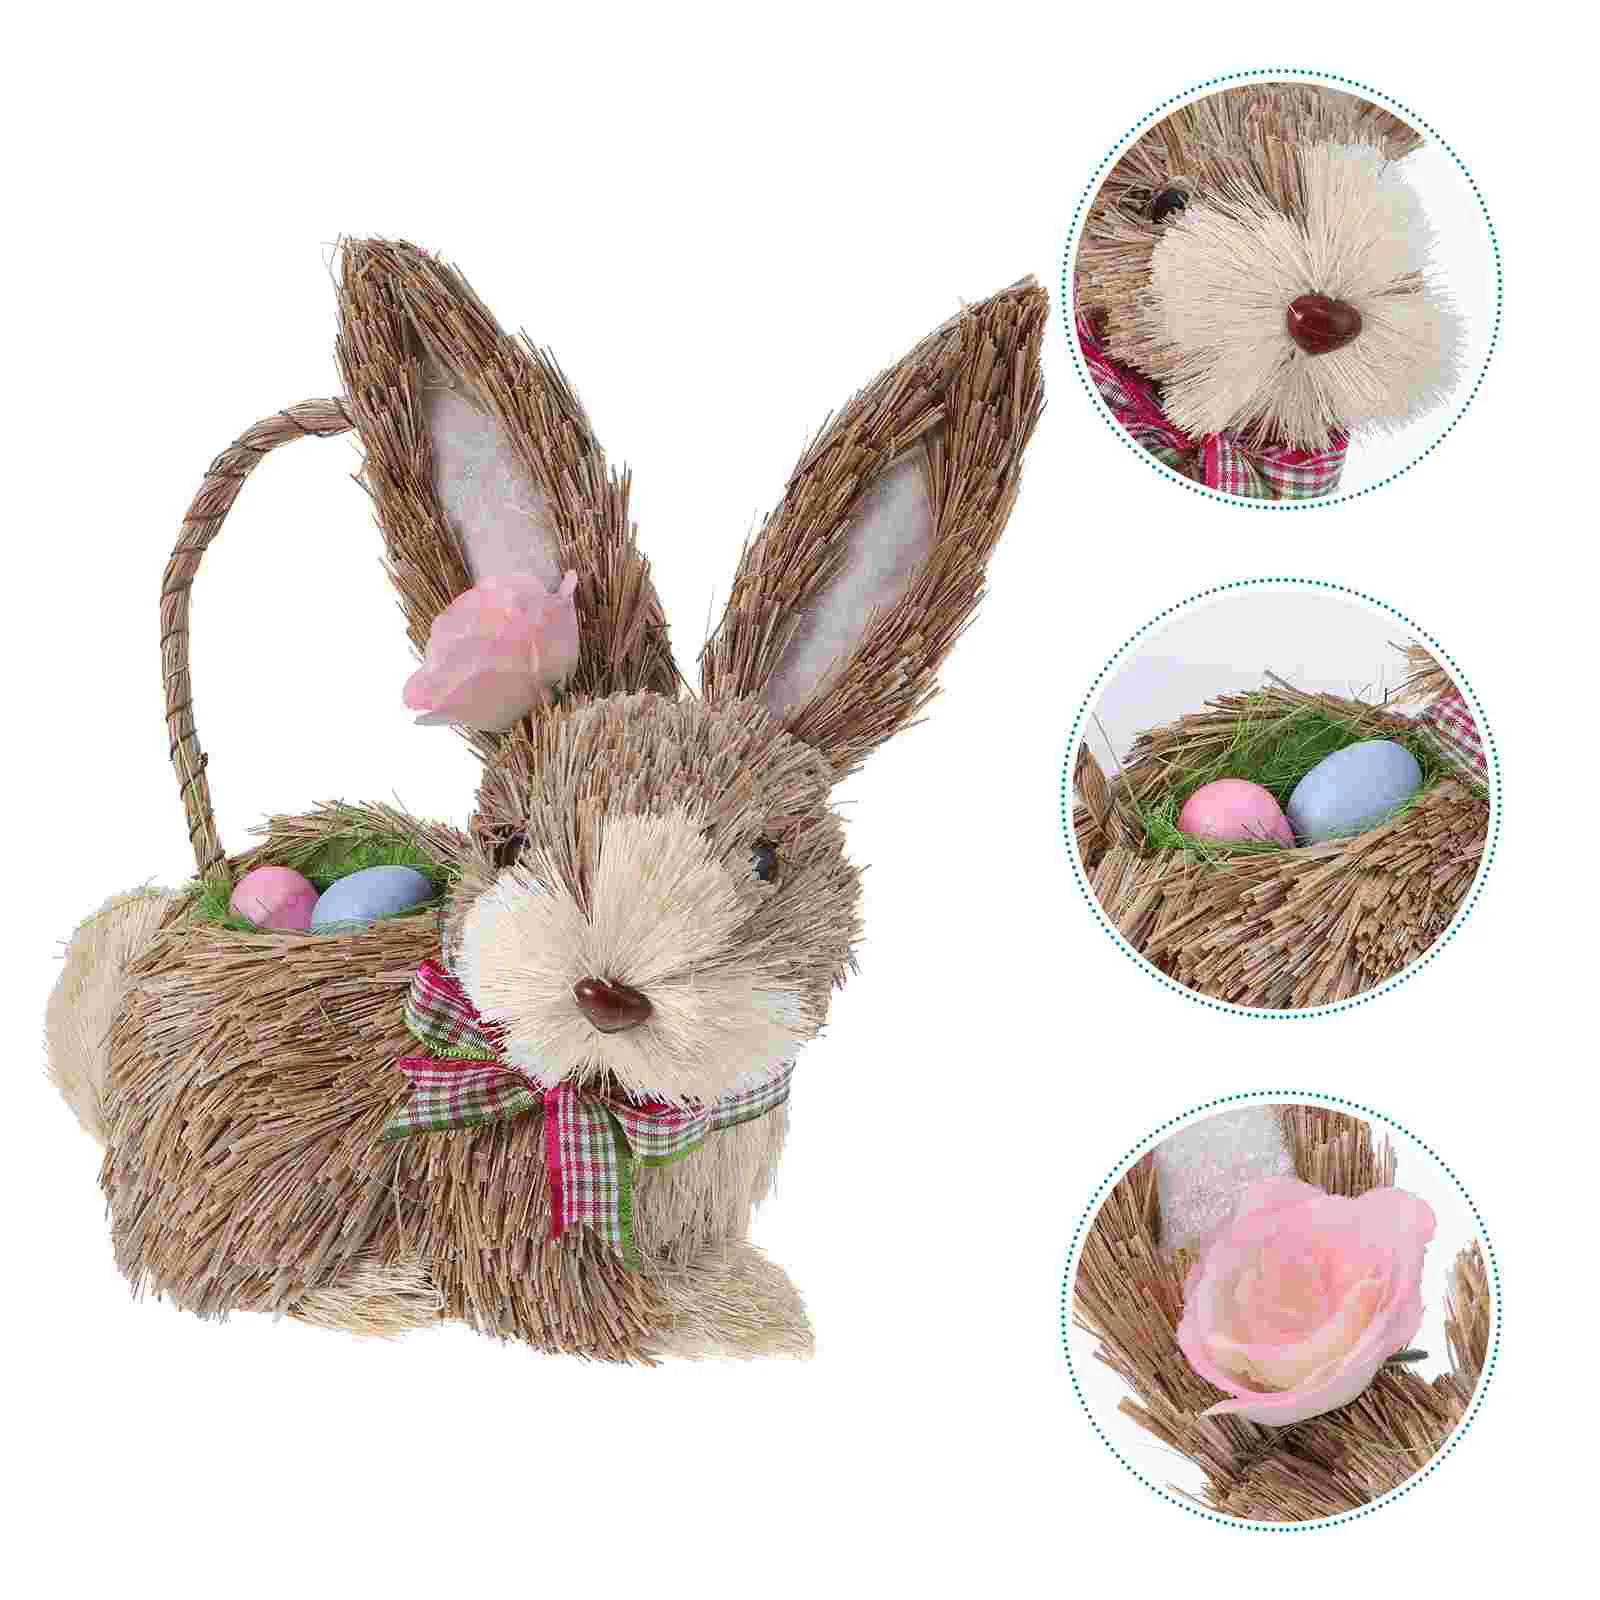 

Easter Bunny Rabbit Straw Woven Decor Figurine Ornament Ornaments Figurines Egg Decoration Statue Hand Tabletop Baskets